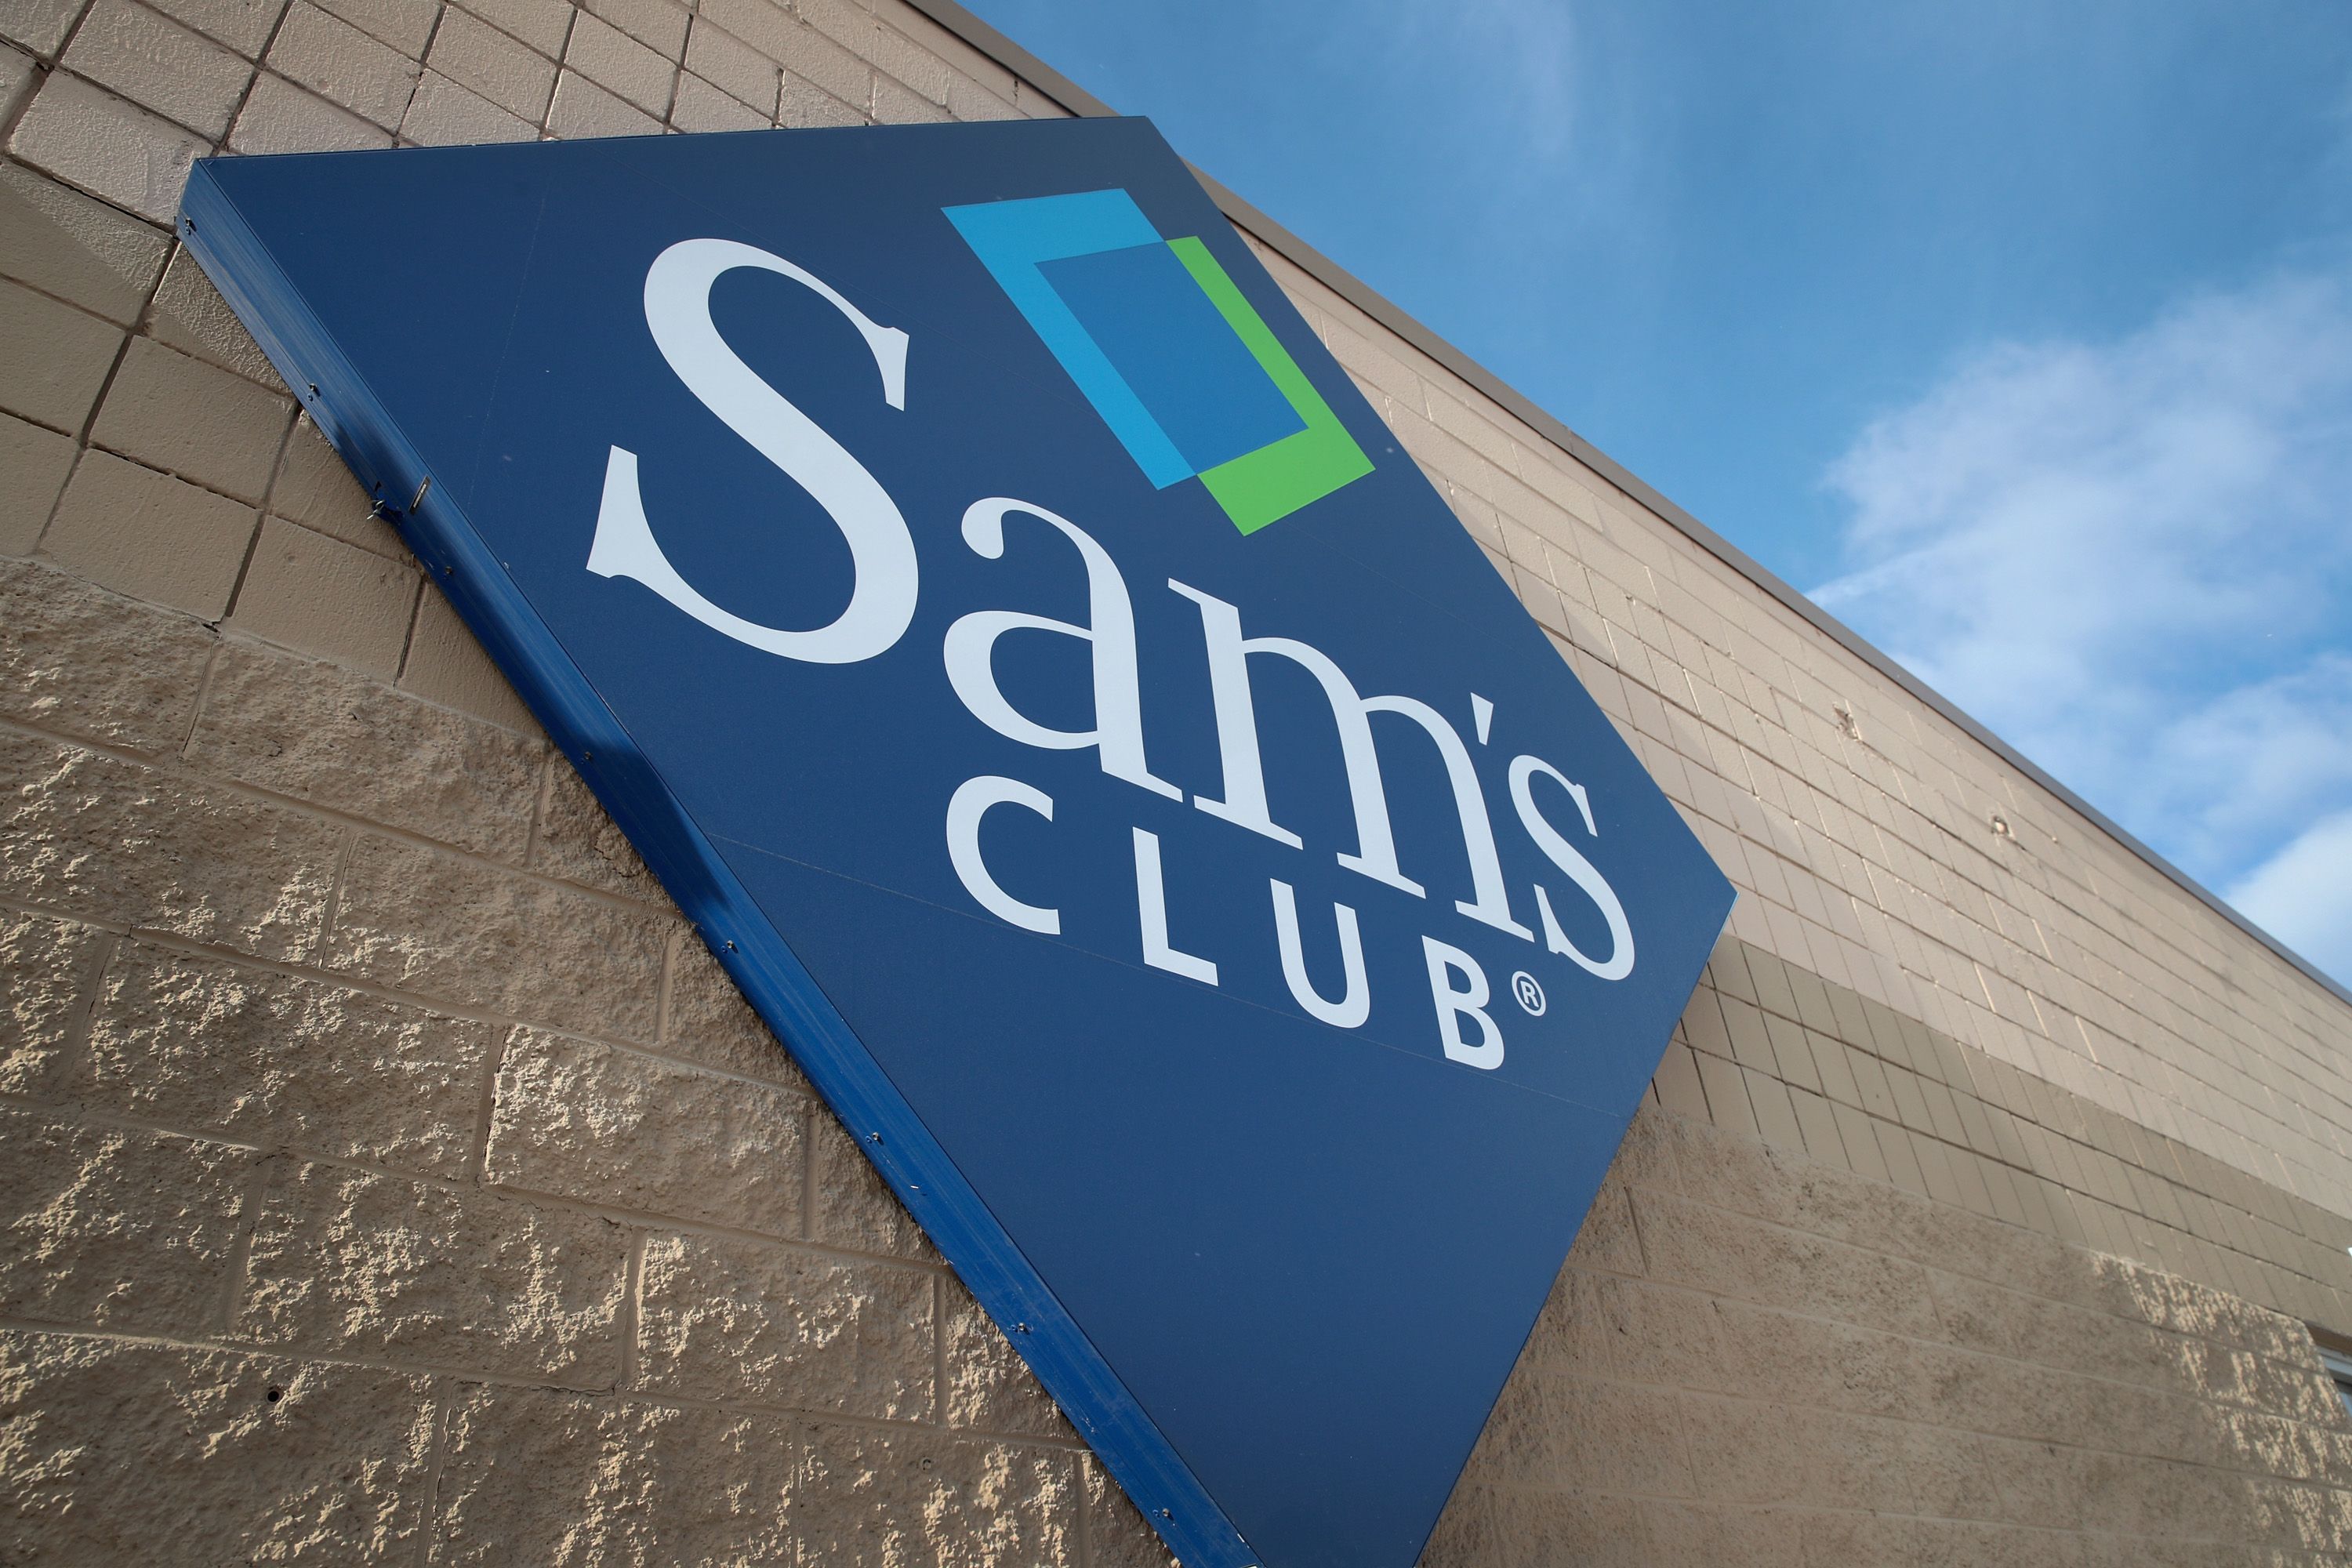 Sam's Club Memorial Day Hours 2022 - Is Sam's Club Open On Memorial Day?